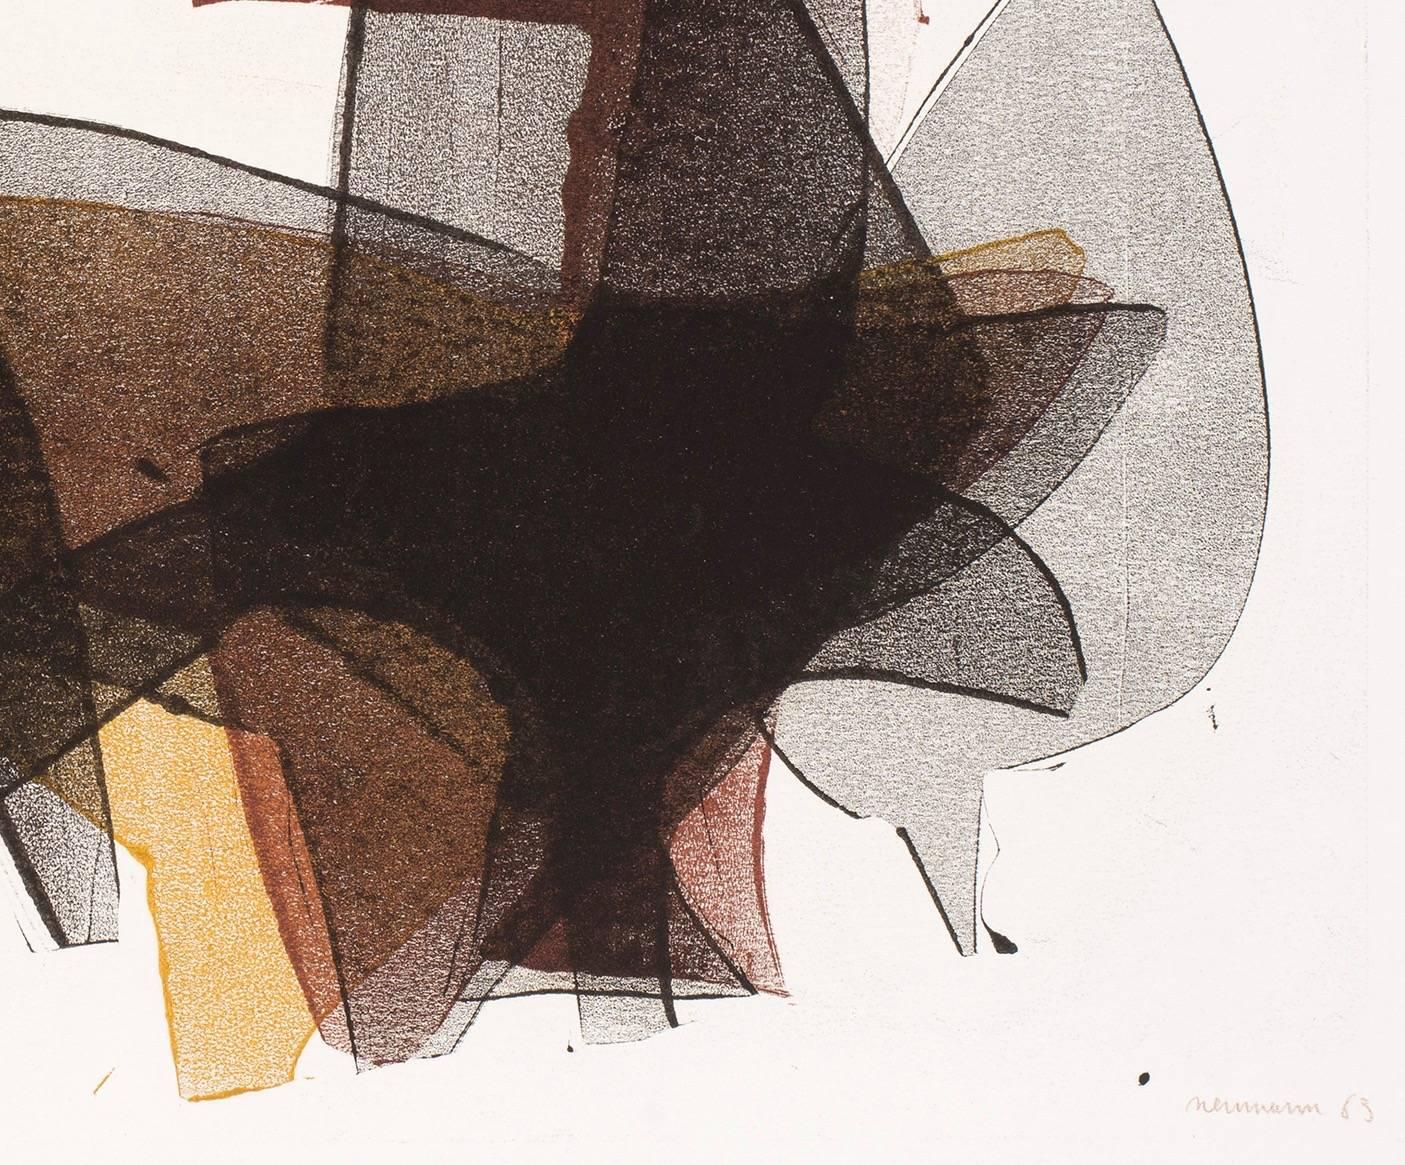 Estate No. 072040 - Abstract Expressionist Print by Otto Neumann